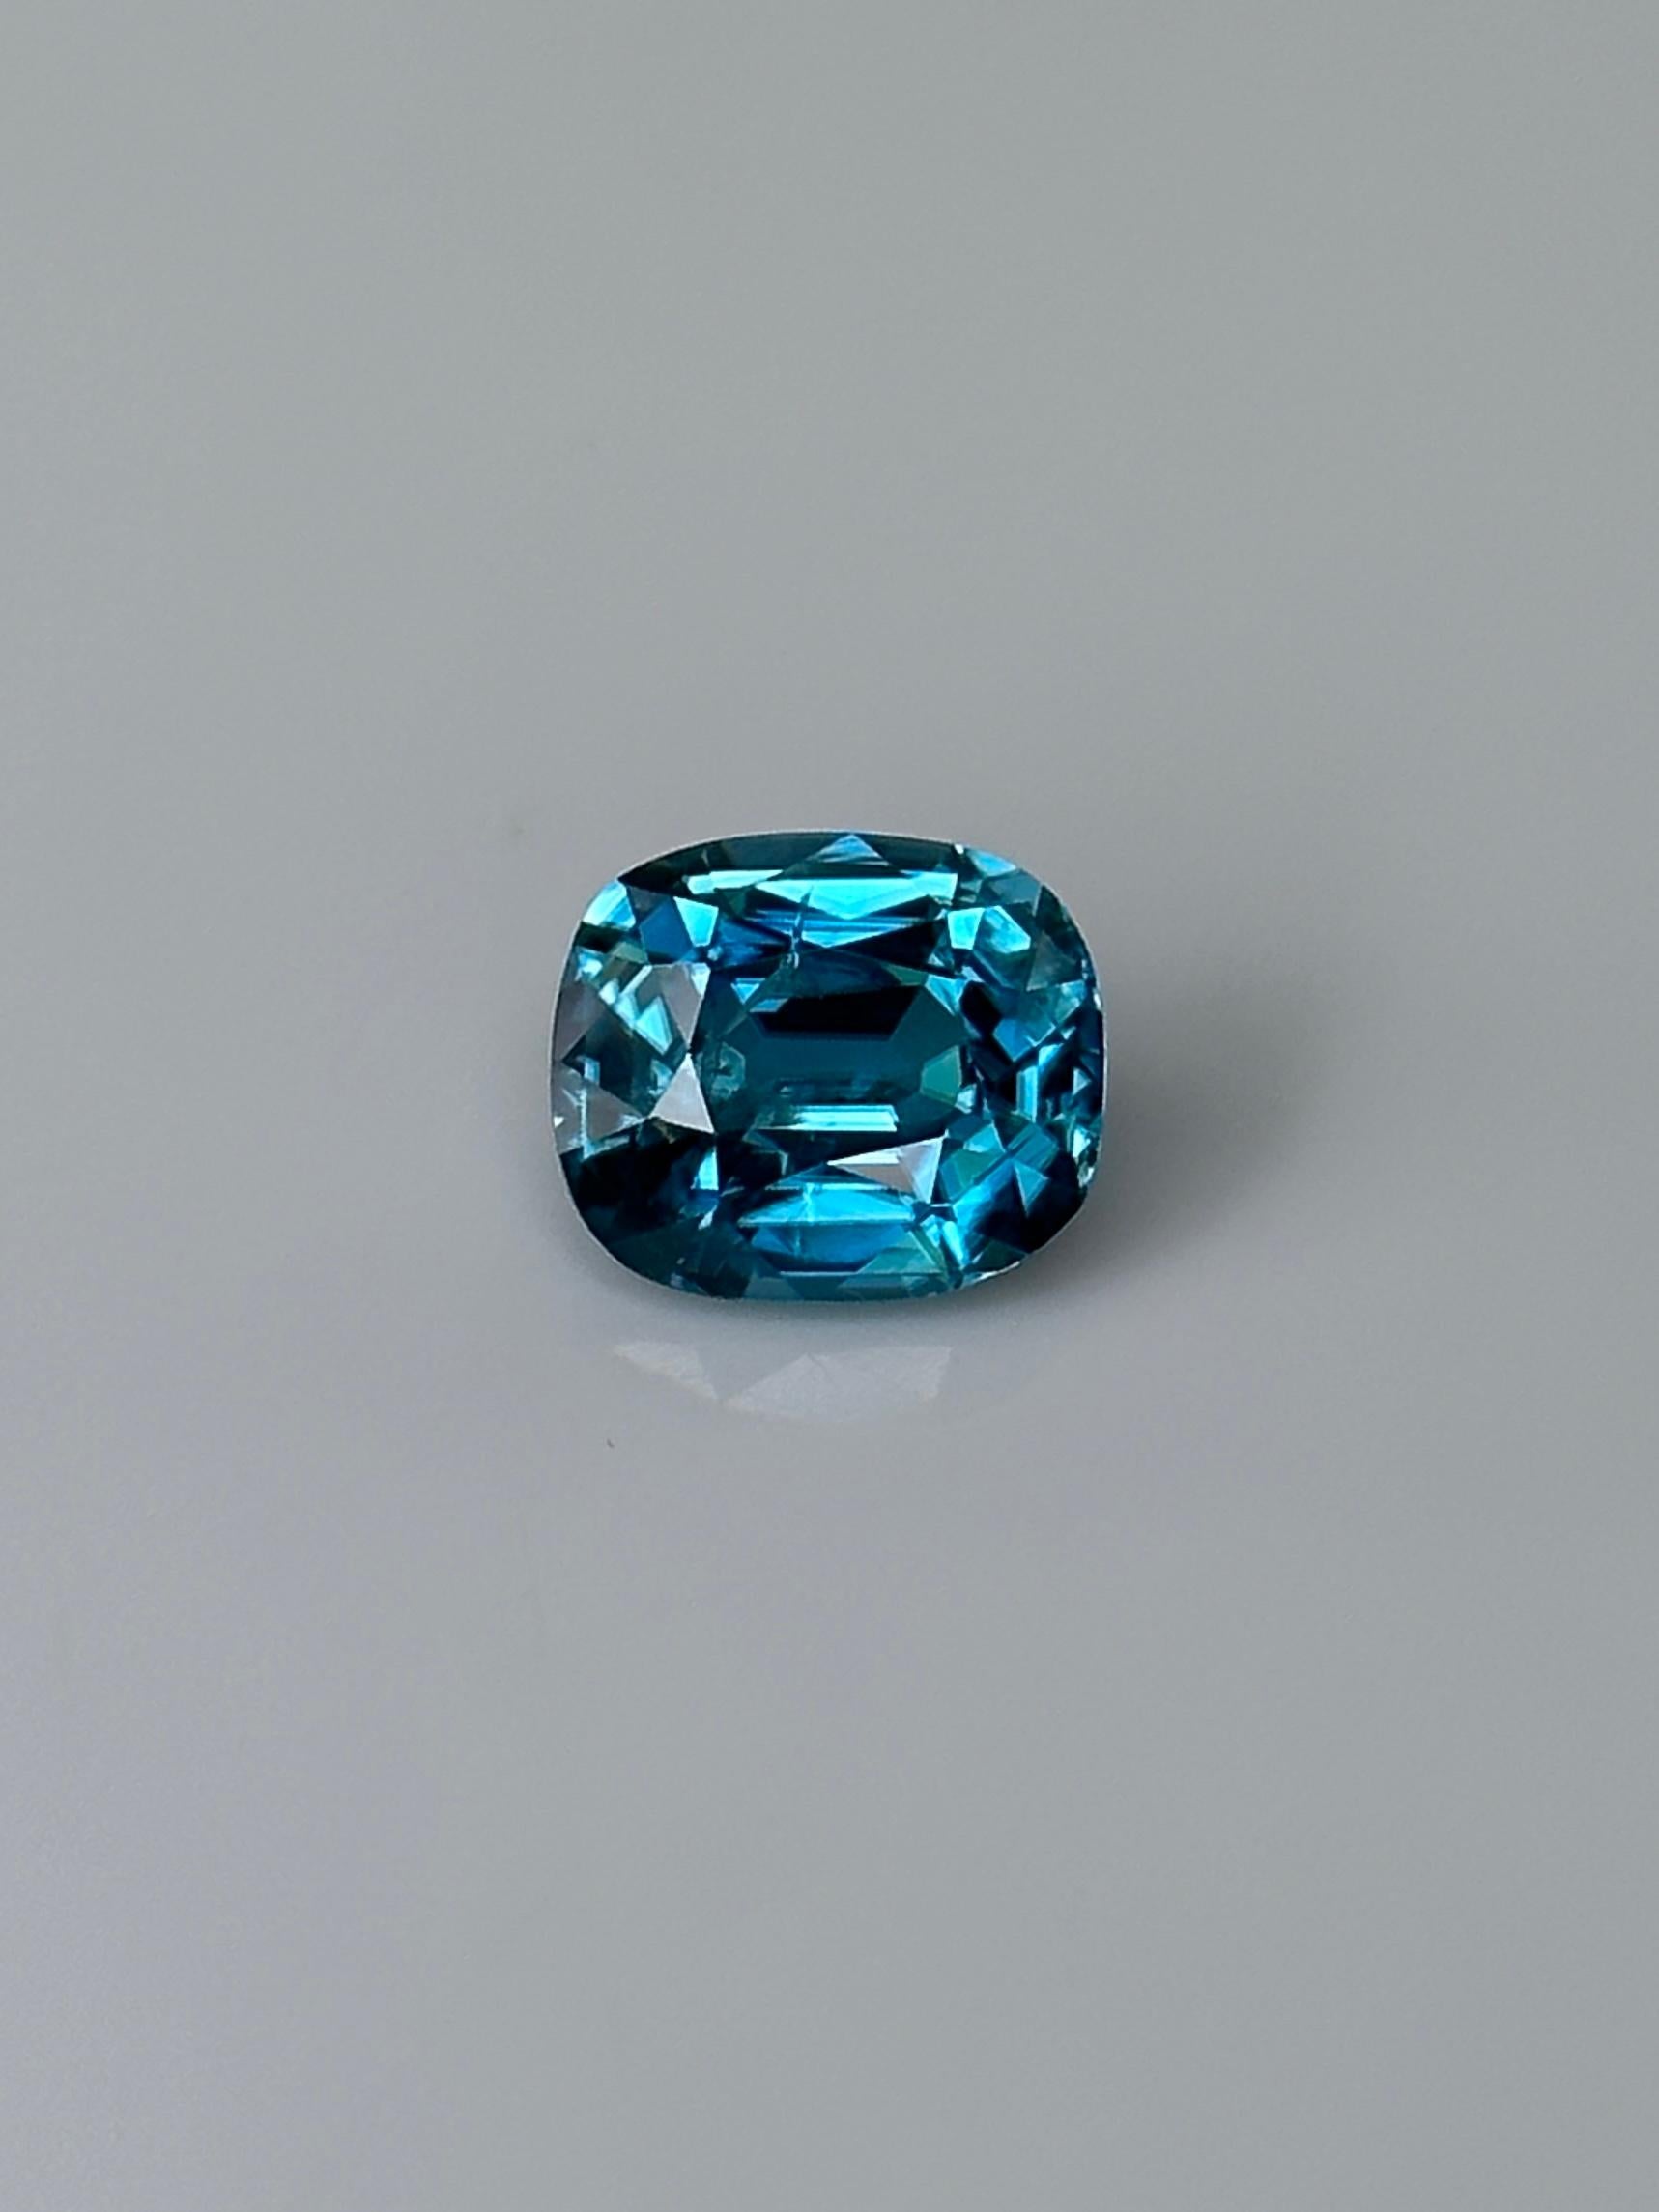 An astonishing sparkling cushion cut 'Ocean Blue' Zircon from Ratanakiri, Cambodia.

A cut different than the 'large pavilion' local ones has been tried on this fine stone, resulting in a gem of not only brilliance and color but also sublime shape